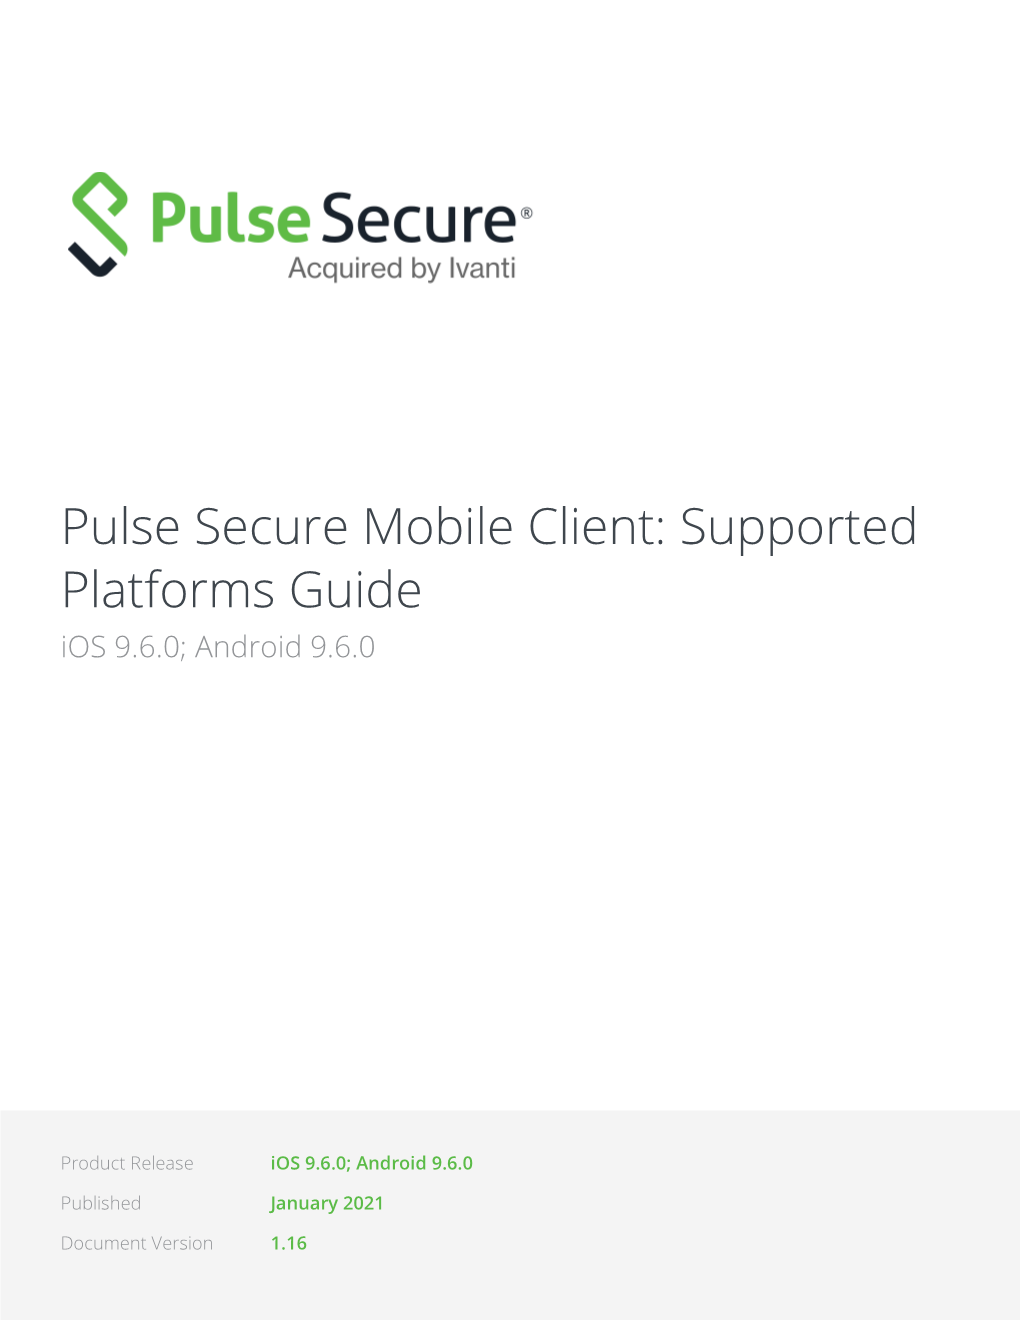 Pulse Secure Mobile Client Supported Platforms Guide